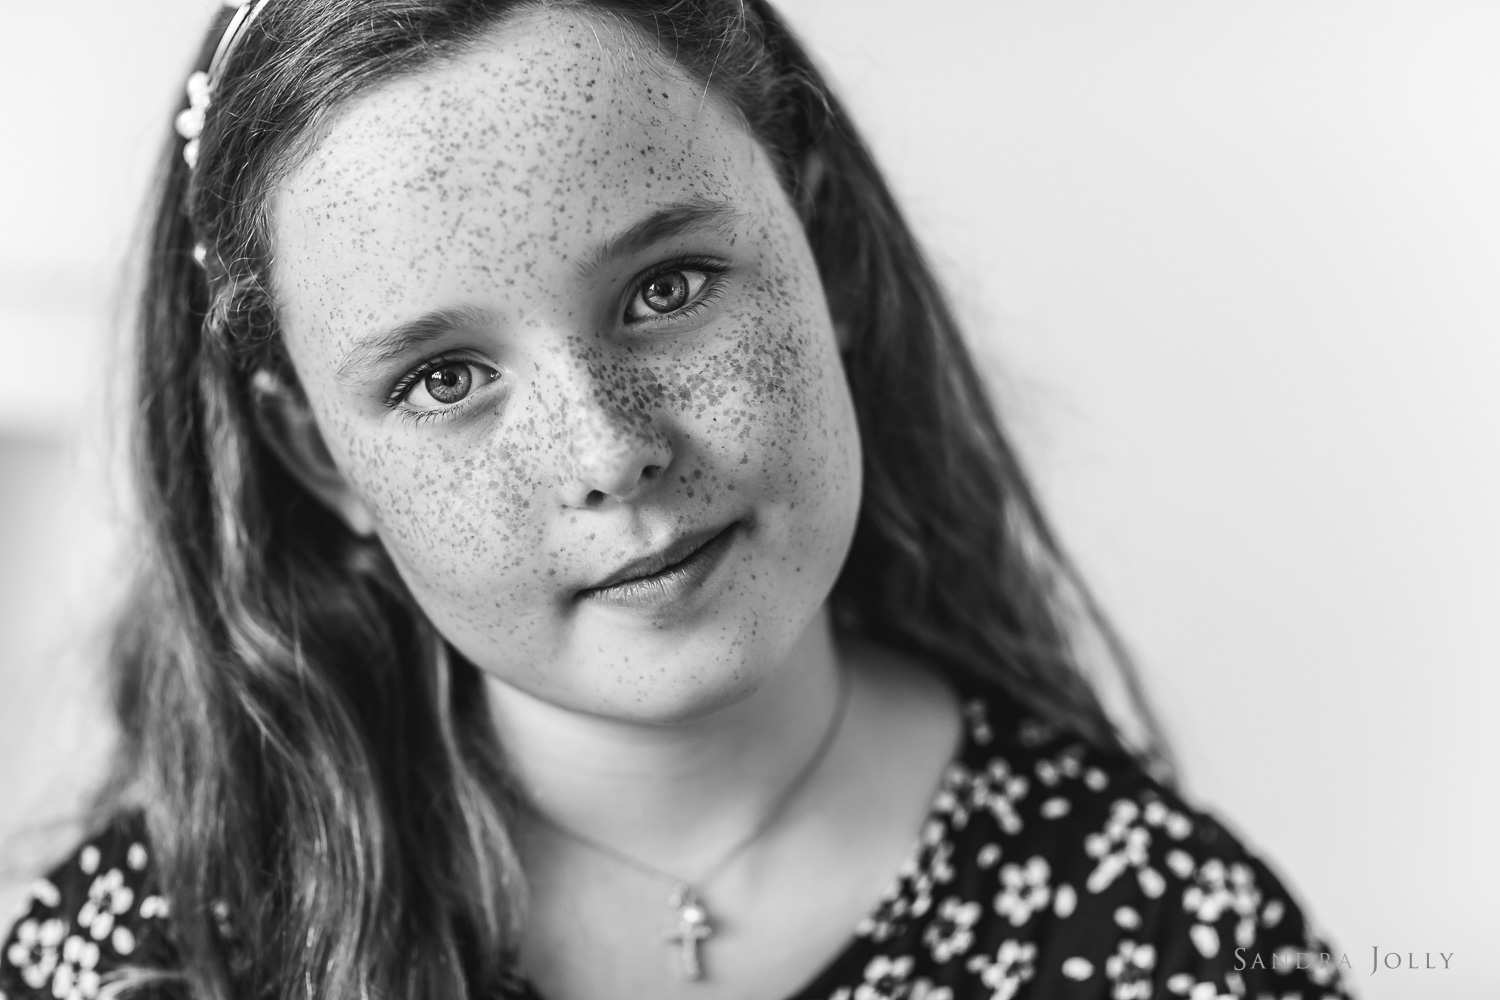 tween-girl-with-freckles-by-Stockholm-family-photographer-Sandra-Jolly.jpg